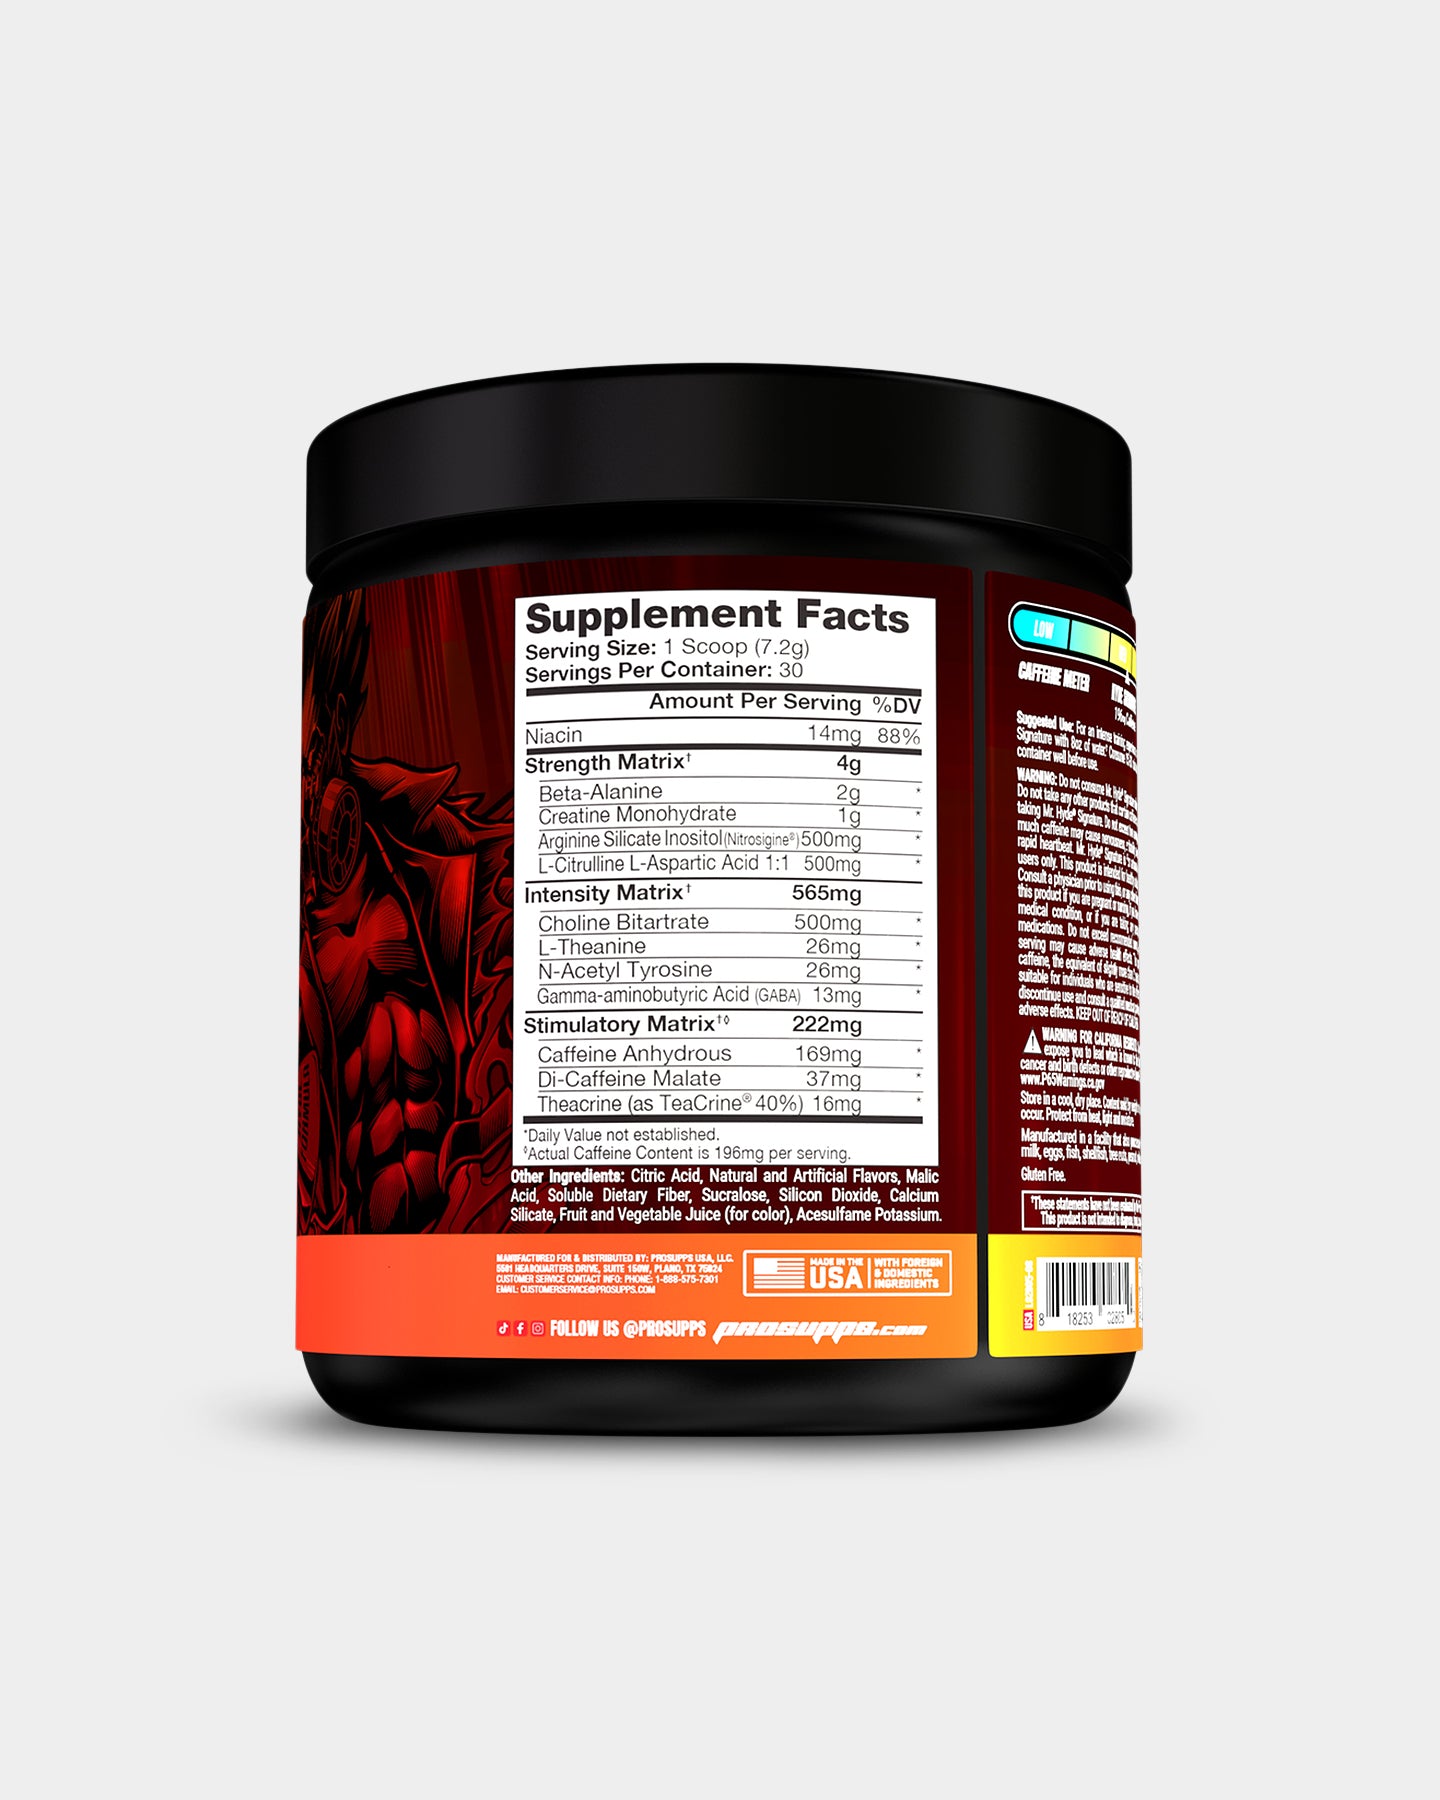 Pro Supps Mr. HYDE Signature, Fruit Punch, 30 Servings A2